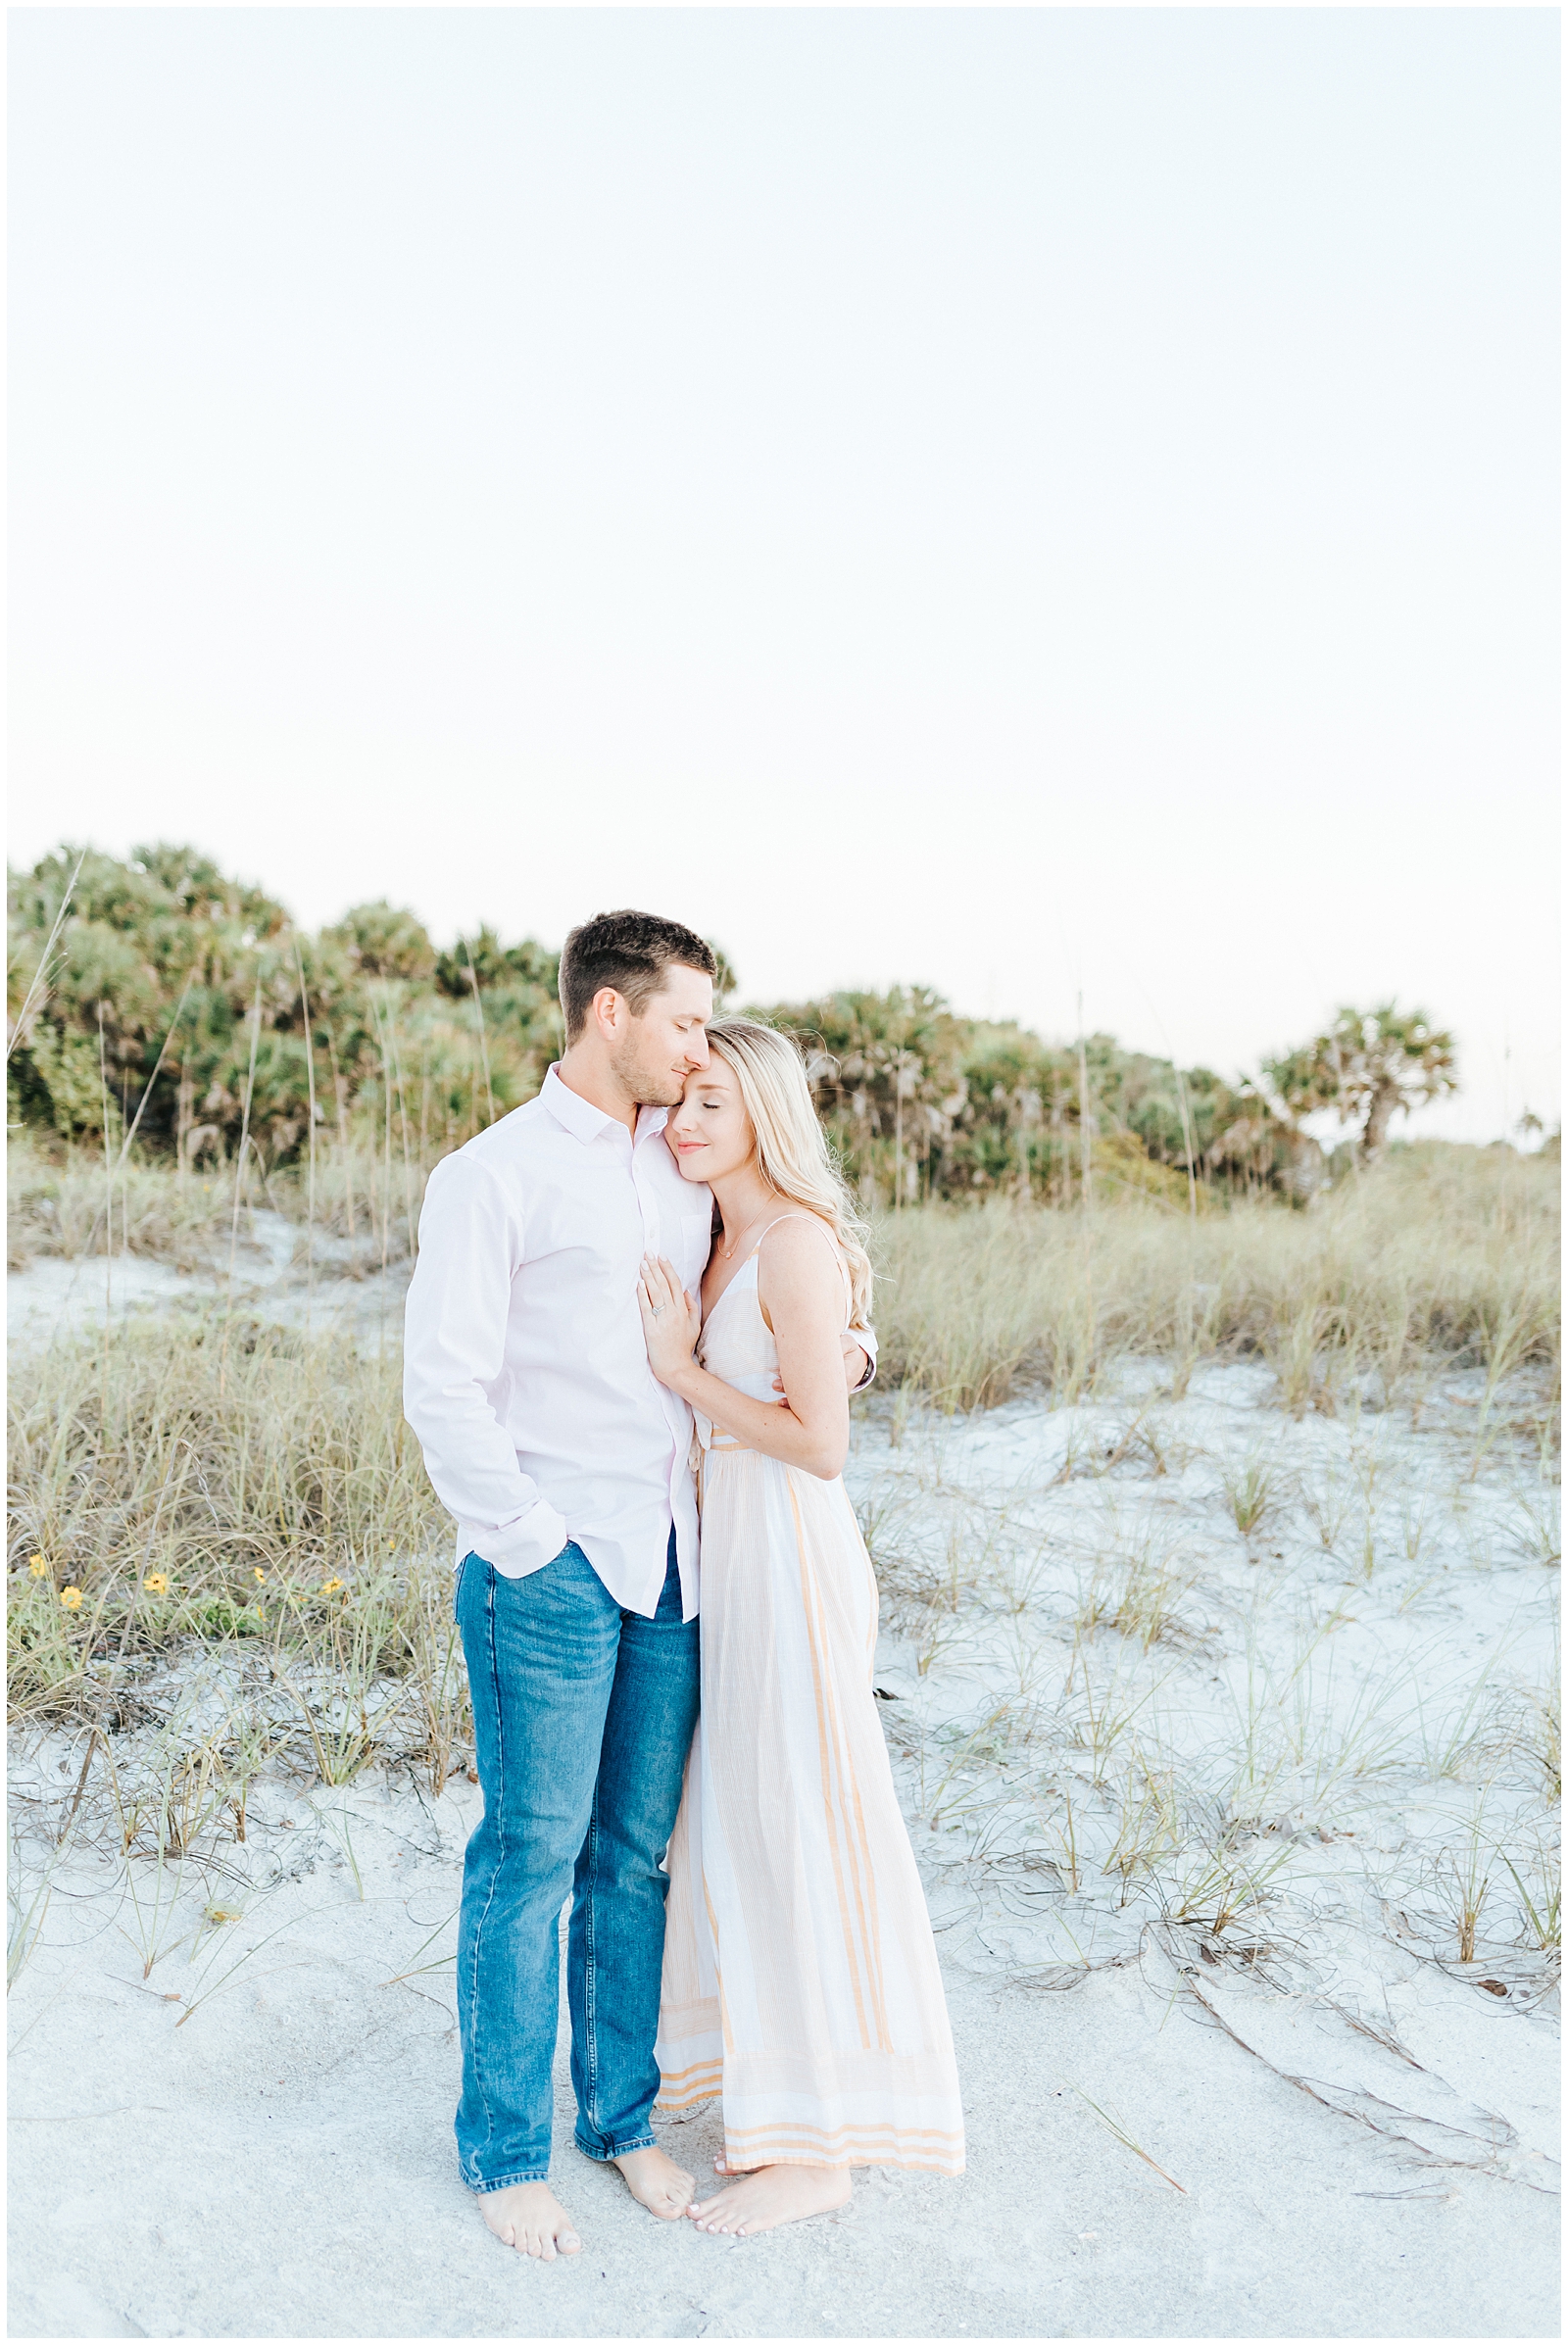 Fort Desoto Couples Session on the beach with Palm Trees at golden hour in Central Florida